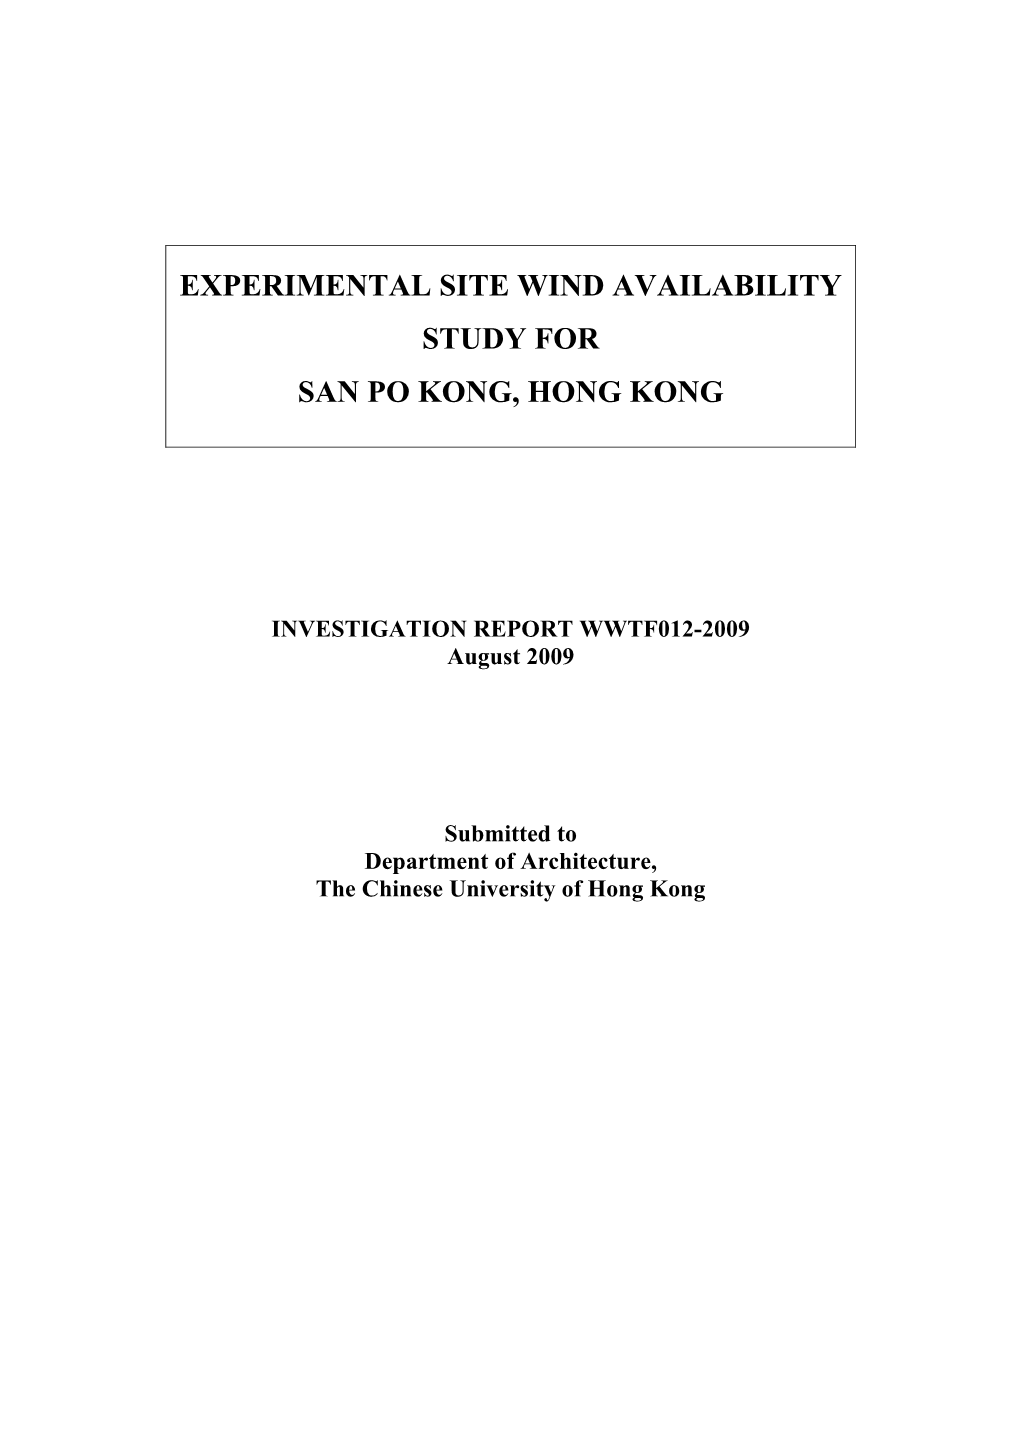 Experimental Site Wind Availability Data for San Po Kong